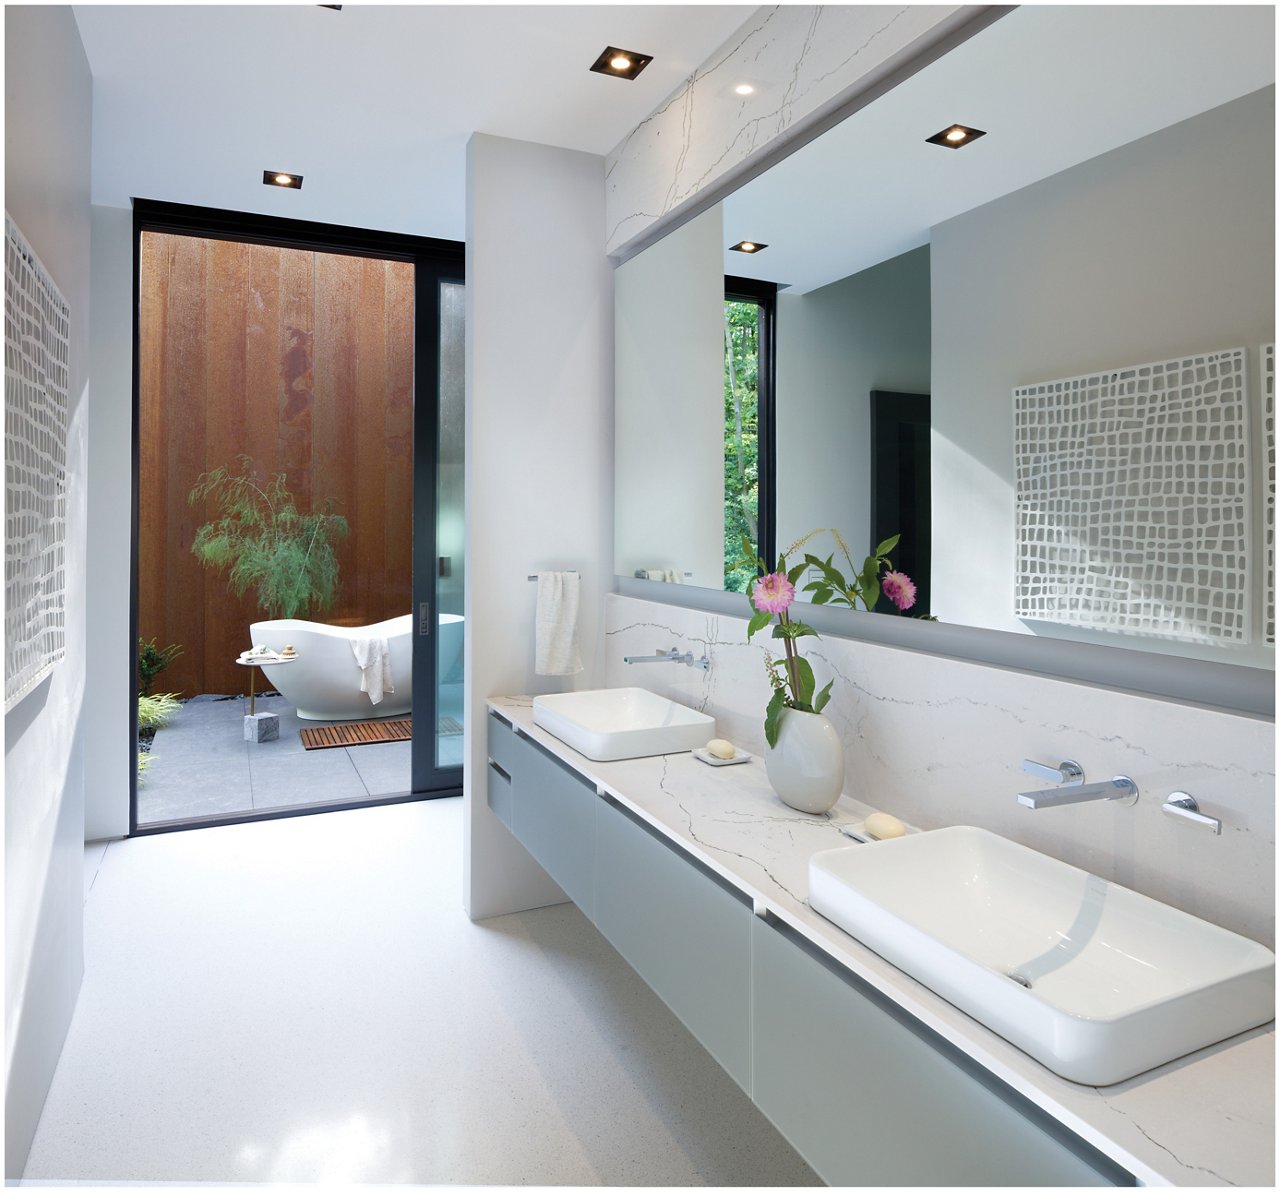 A modern bathroom with a floating vanity, white quartz countertops and backsplash, large mirror, white flooring, and wooden accents near the stand-alone tub.